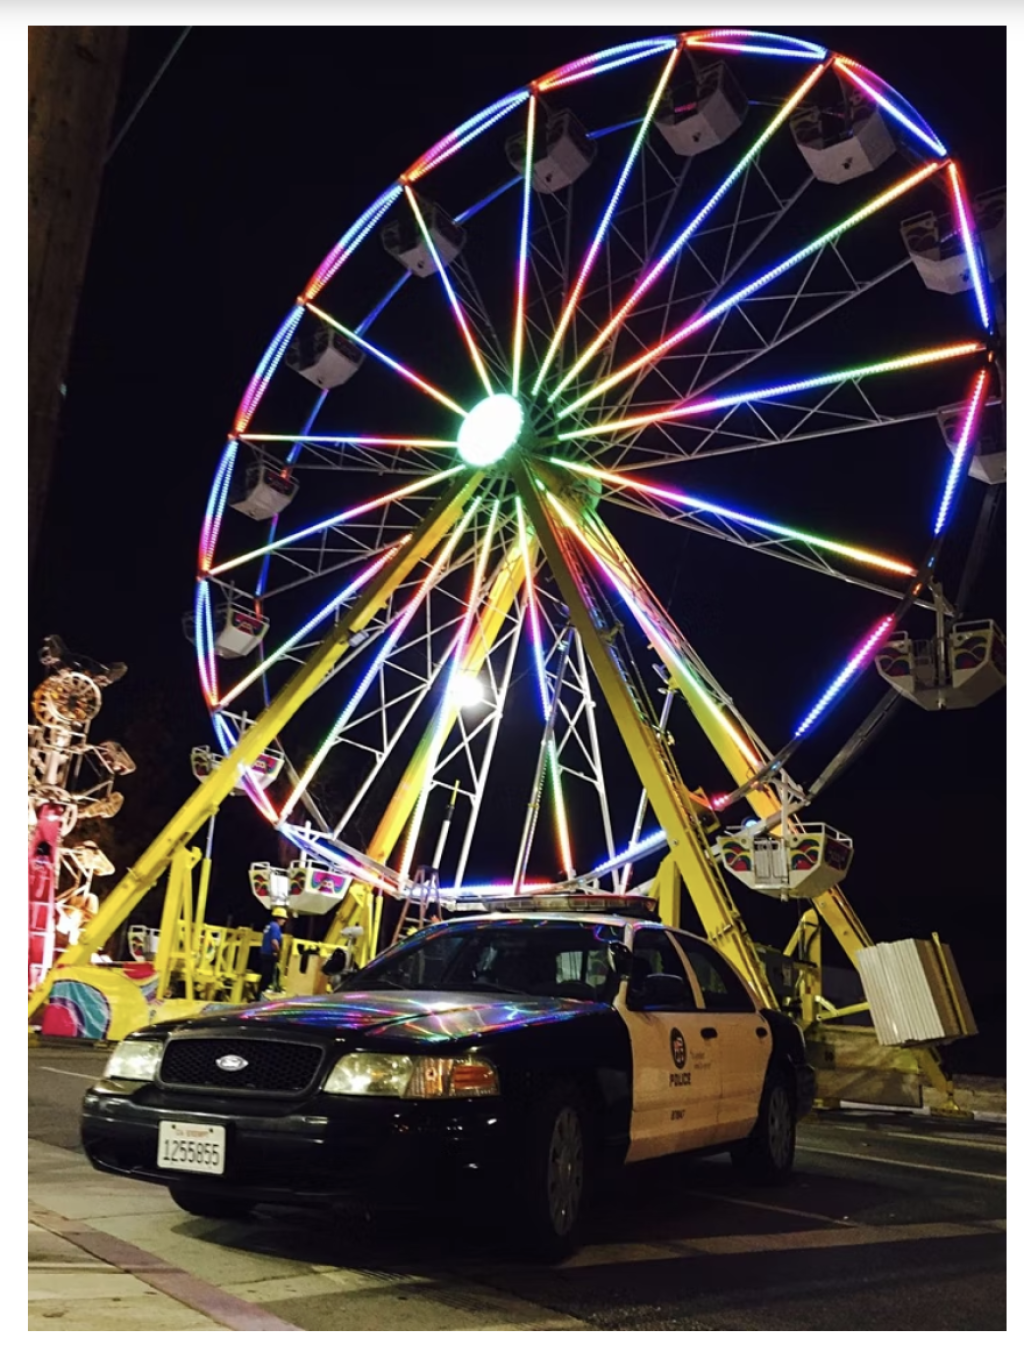 Picture of: Join the fun at LAPD Pacific Area Boosters Summer Carnival on Aug